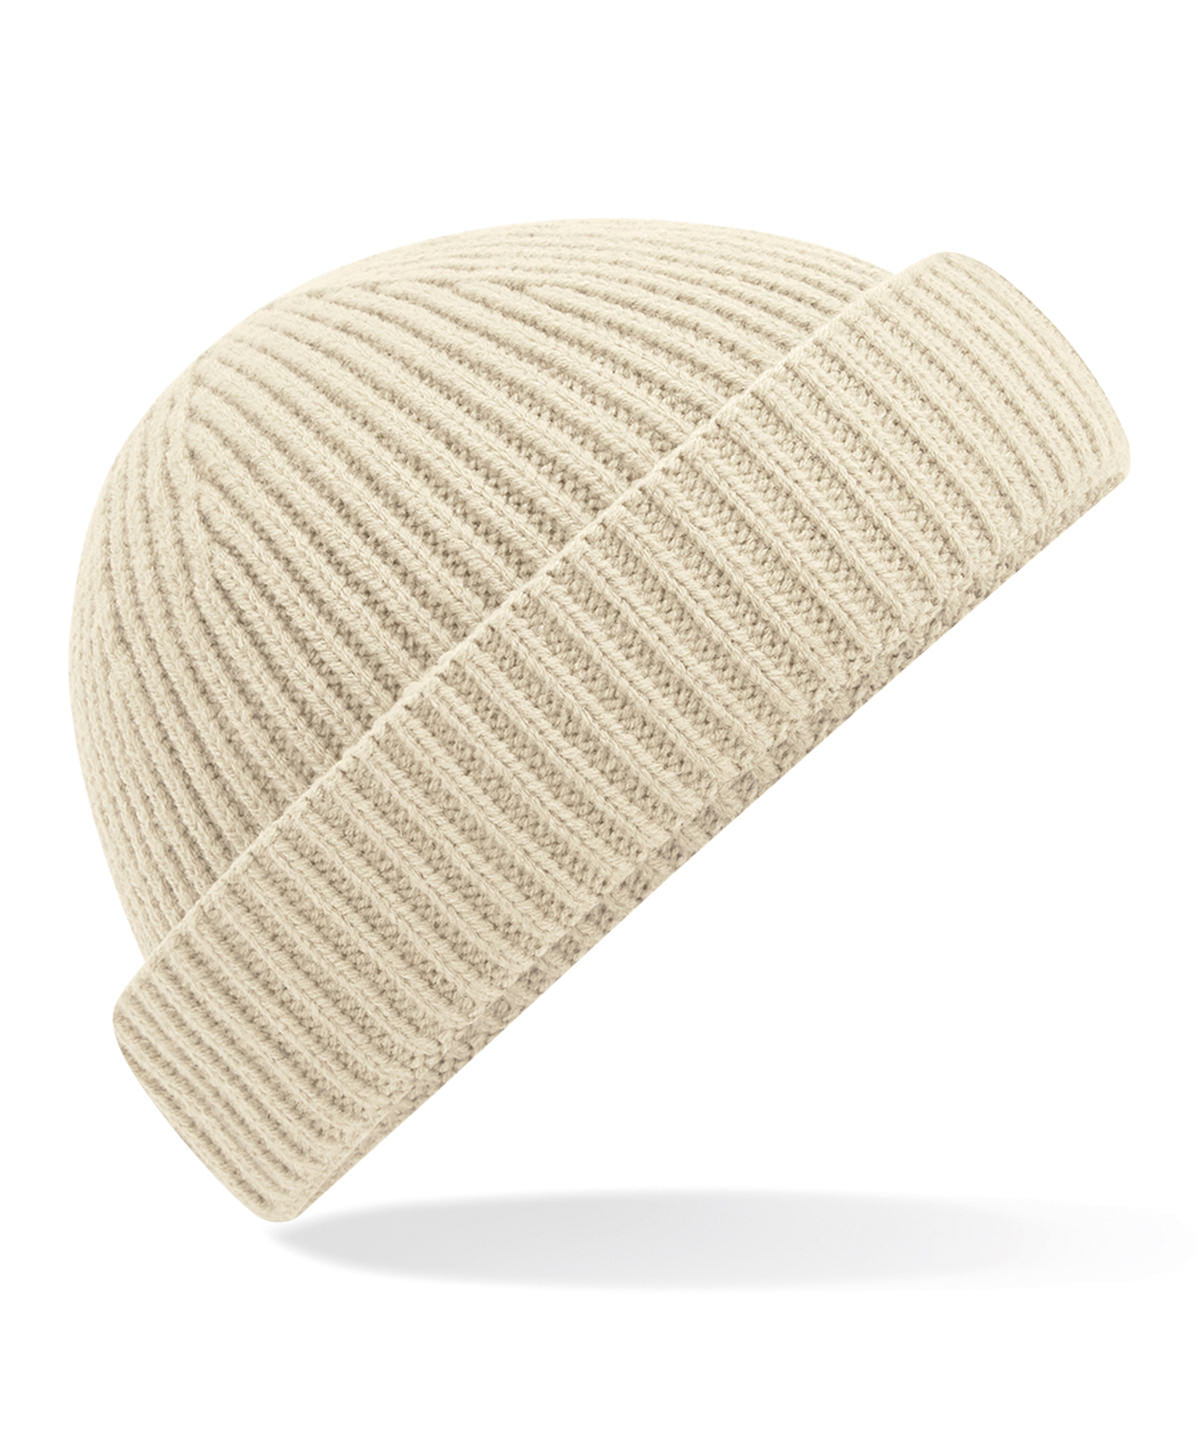 Personalised Hats - Olive Beechfield Harbour beanie